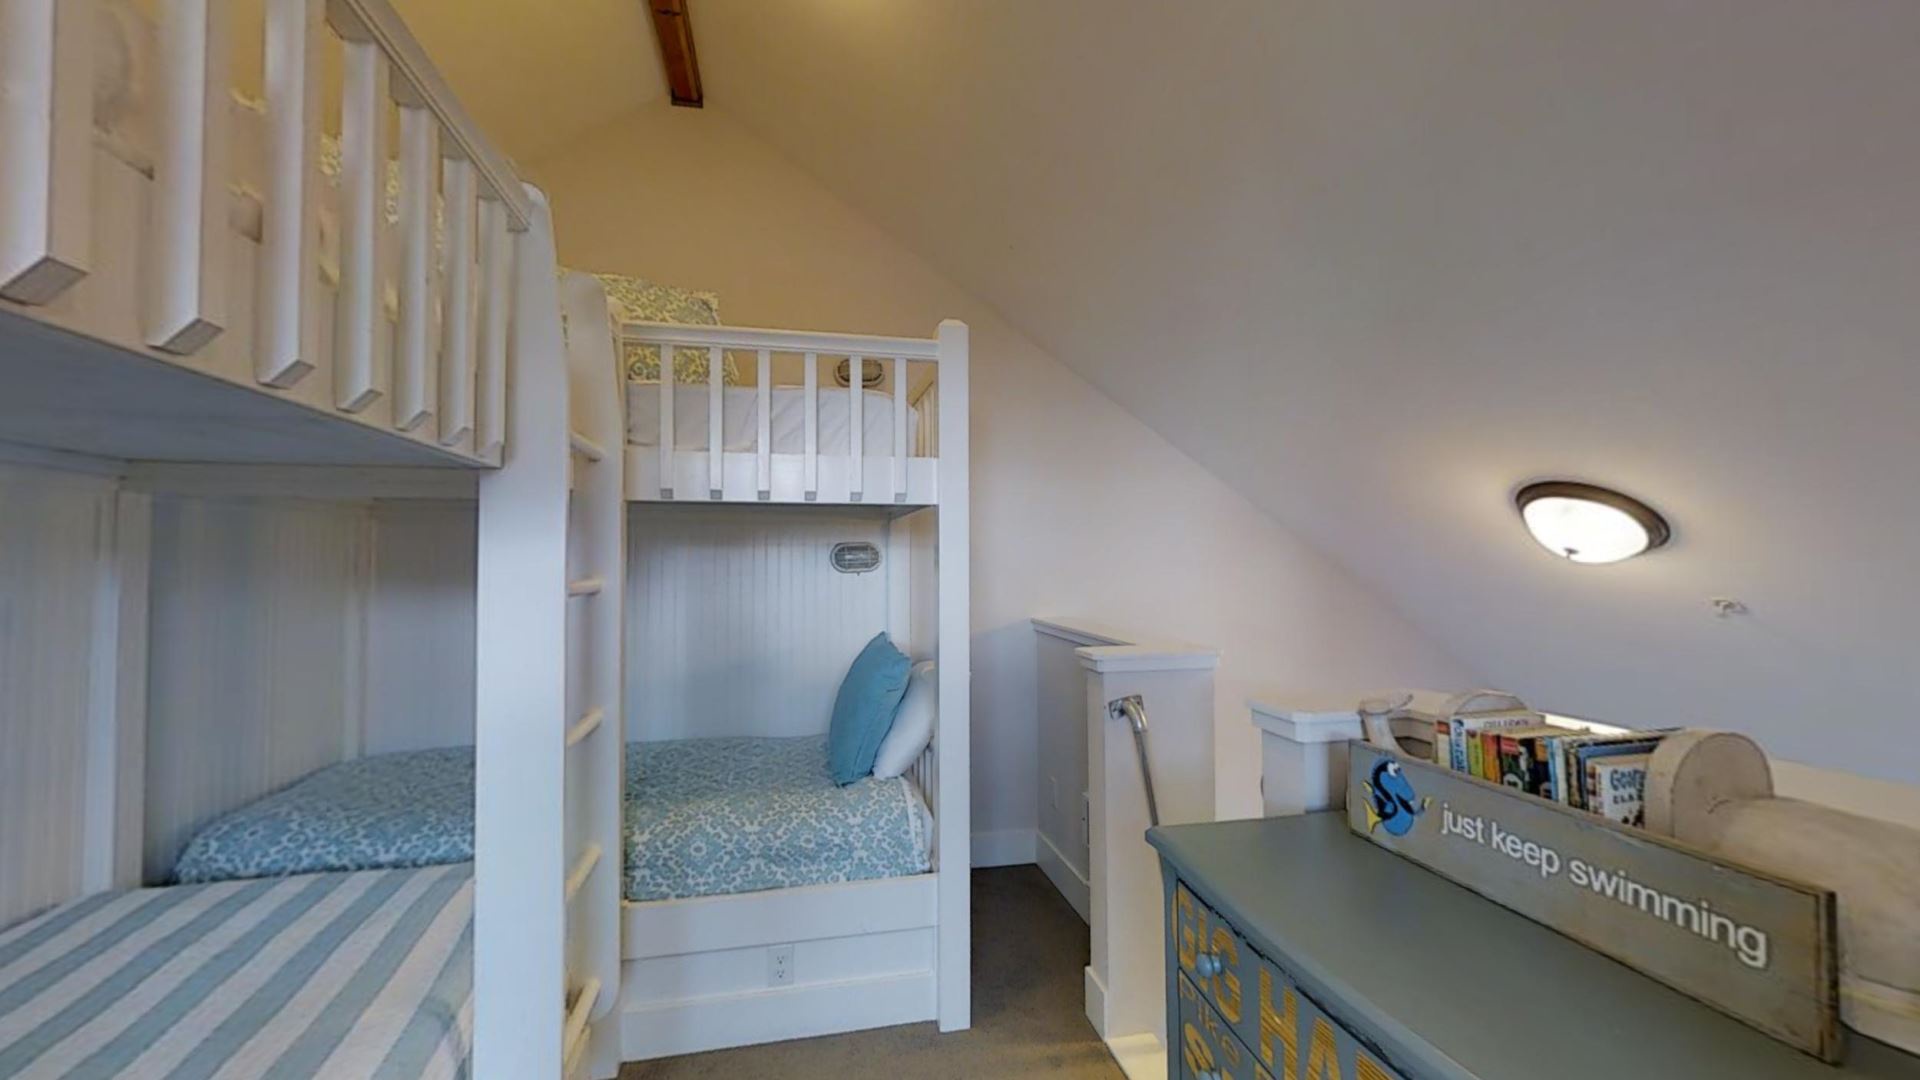 Loft, accessible by ladder, is the highest level in this glorious townhouse, addition to the bunk beds